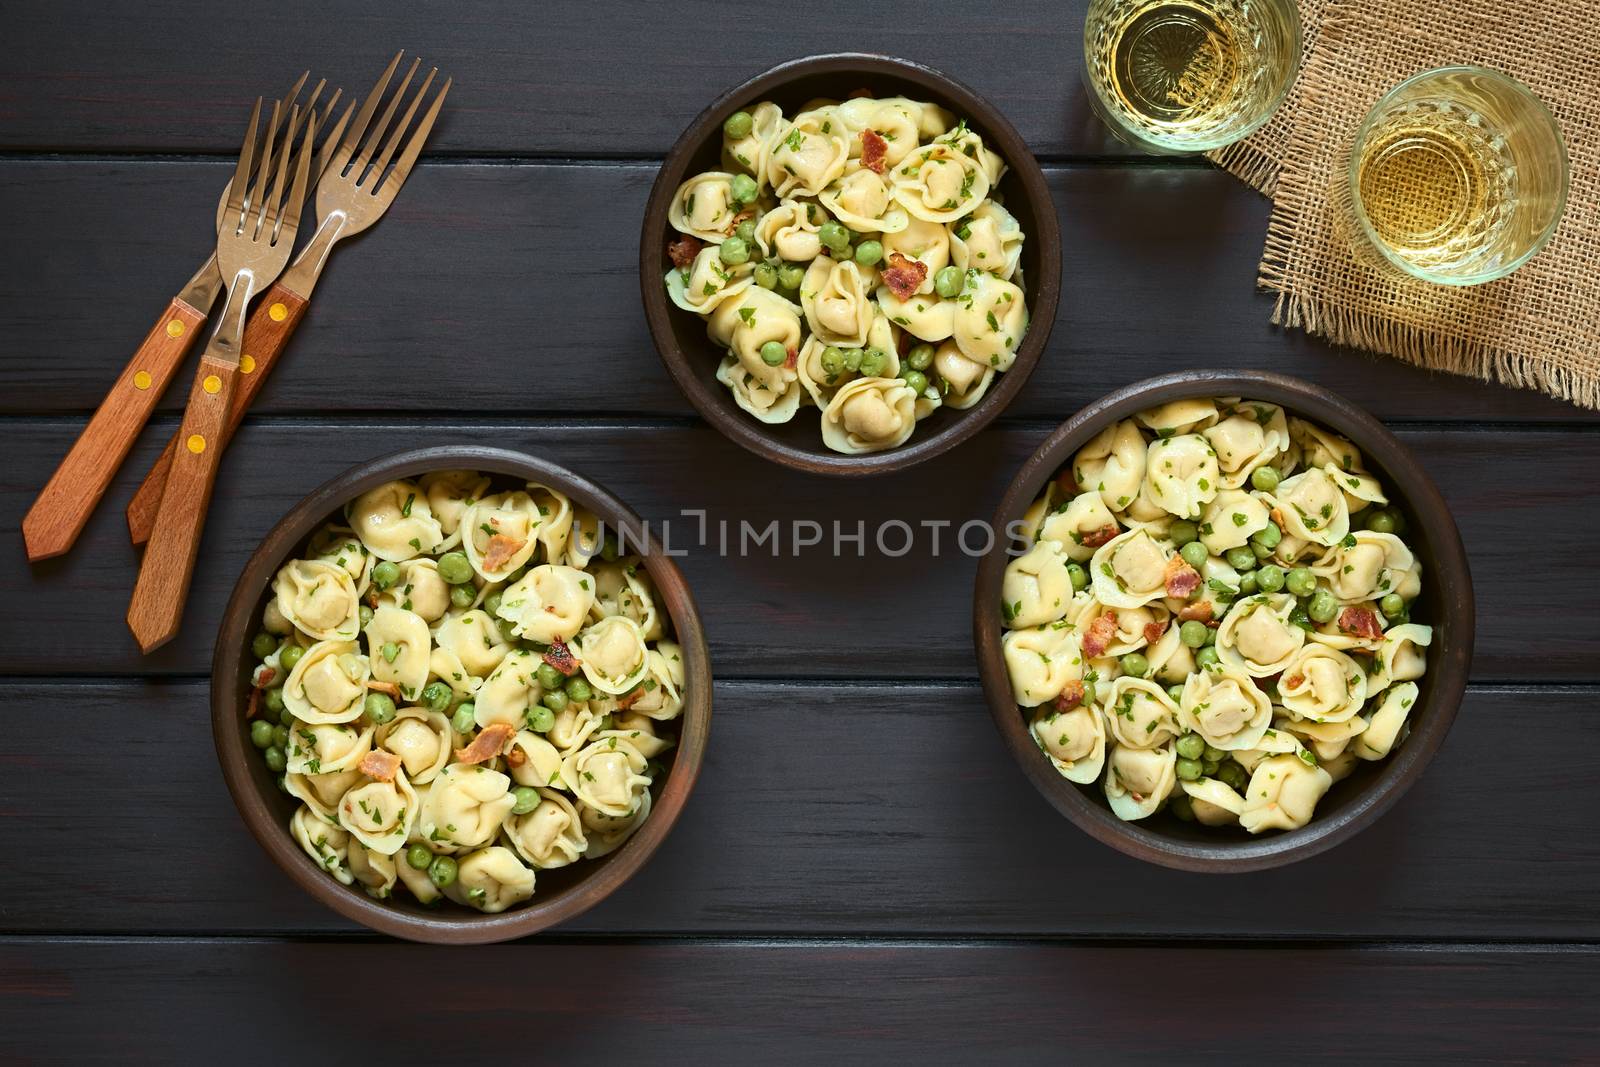 Tortellini salad with green peas, fried bacon and parsley served in rustic bowls, with forks and glasses of white wine on the side, photographed overhead on dark wood with natural light